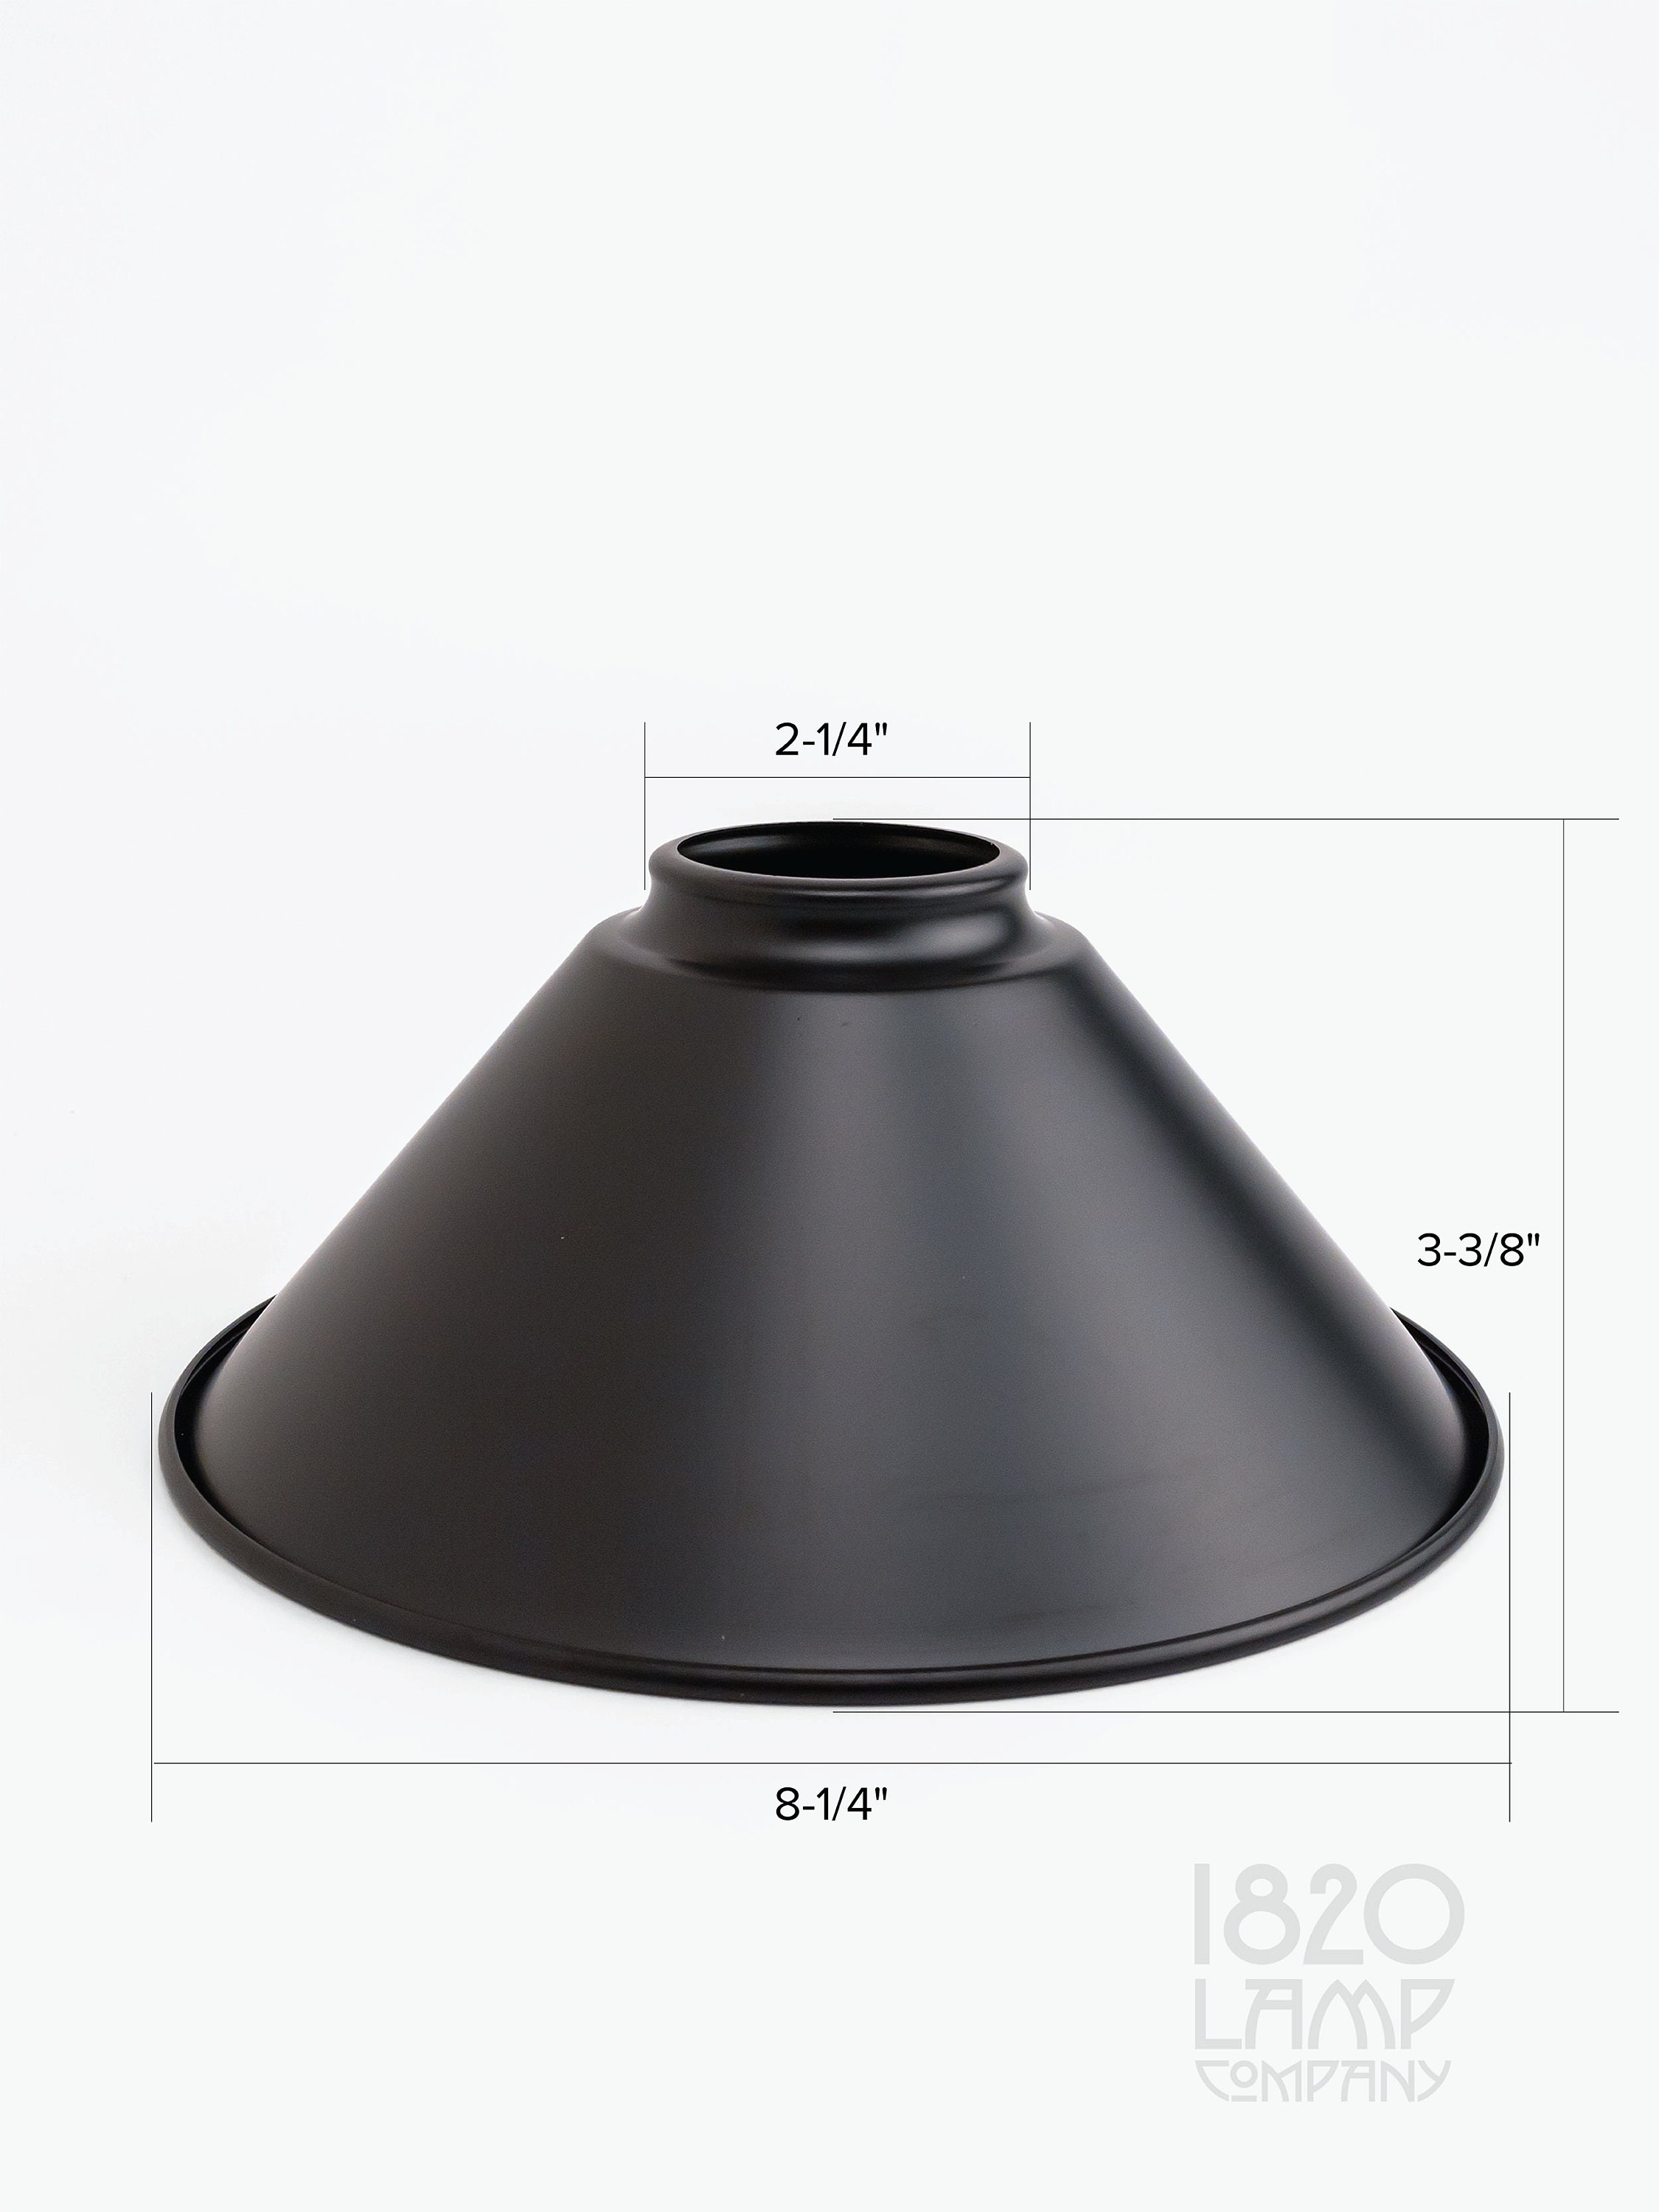 2-1/4 in. Fitter Small Matte White Metal Cone Pendant Lamp Shade